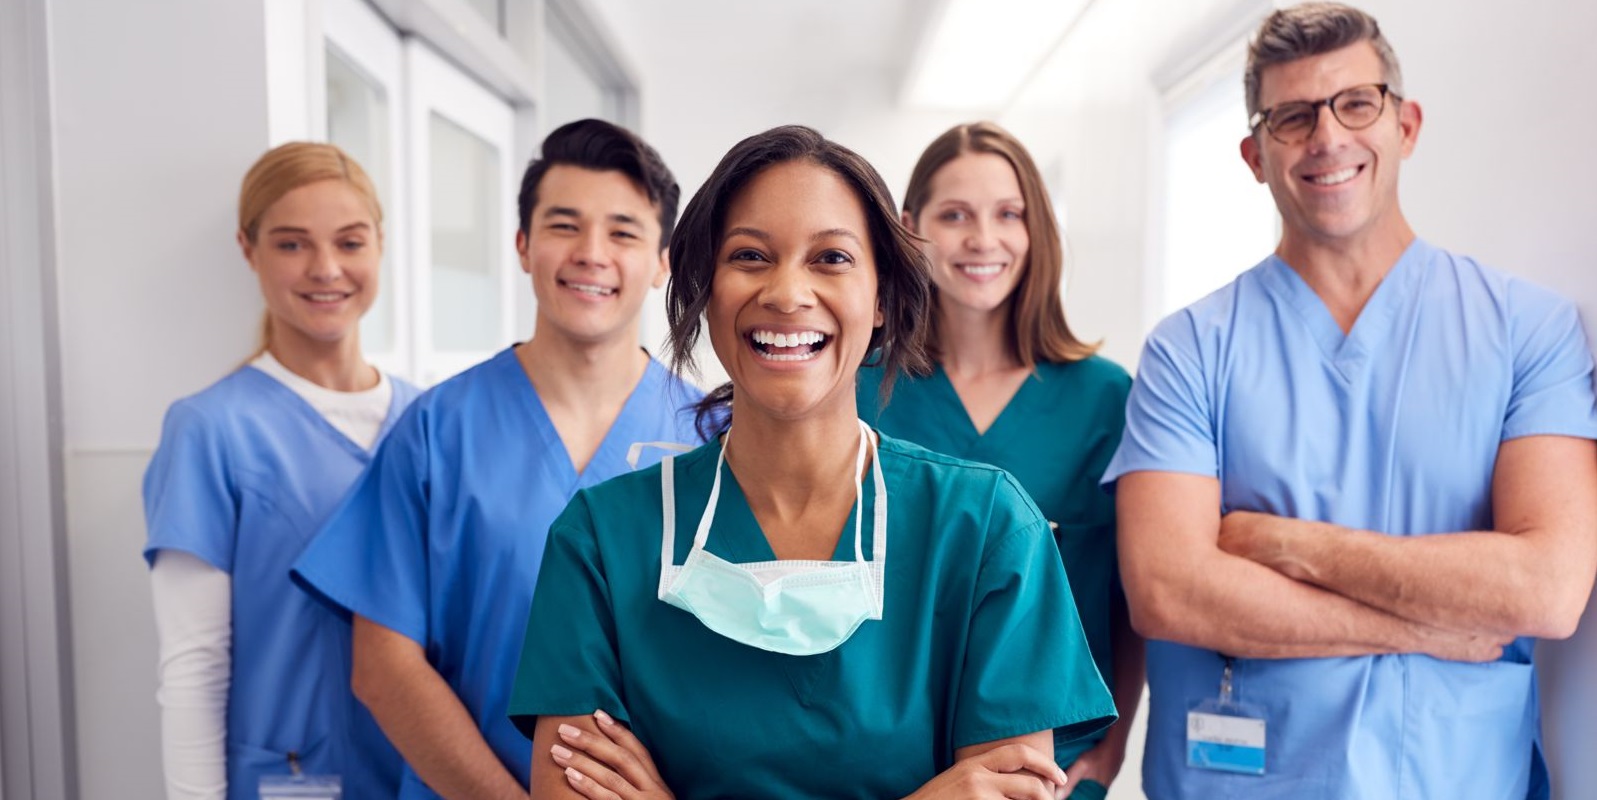 Five health care workers stand in a hallway wearing scrubs in various shades of blue. An African American female stands center with a Caucasian male and female standing directly behind her. Another Caucasian female stands to the far left behind the Caucasian male and another tall Caucasian male stands to the far right.